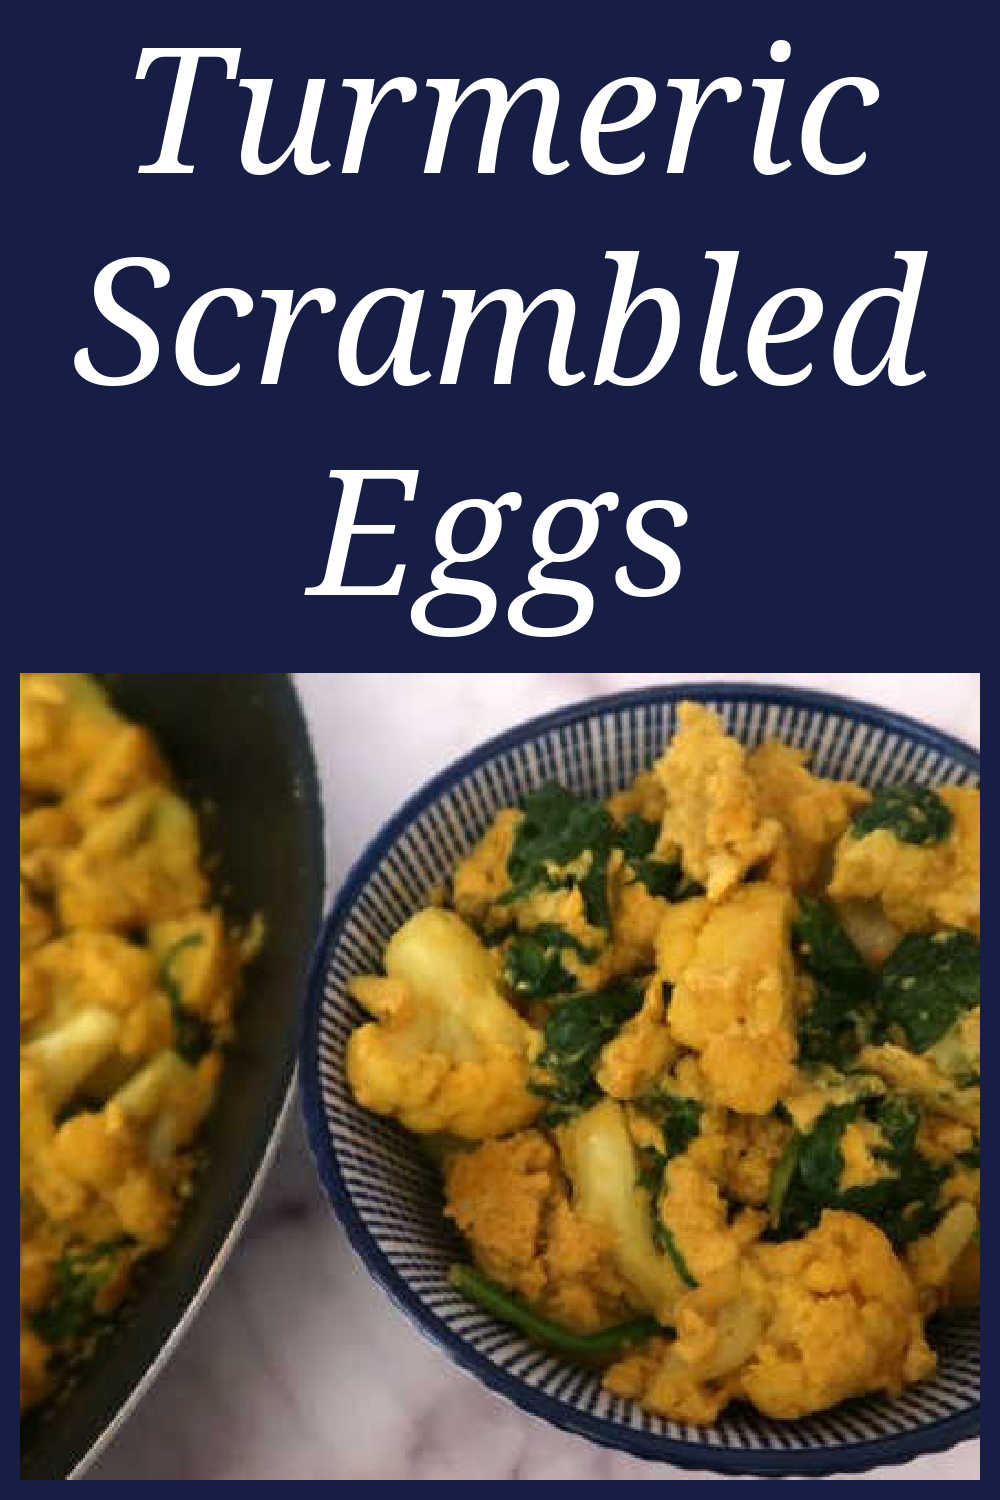 Turmeric Scrambled Eggs Recipe - How to make a healthy egg, cauliflower and spinach breakfast that's quick and easy to meal prep - with the video.